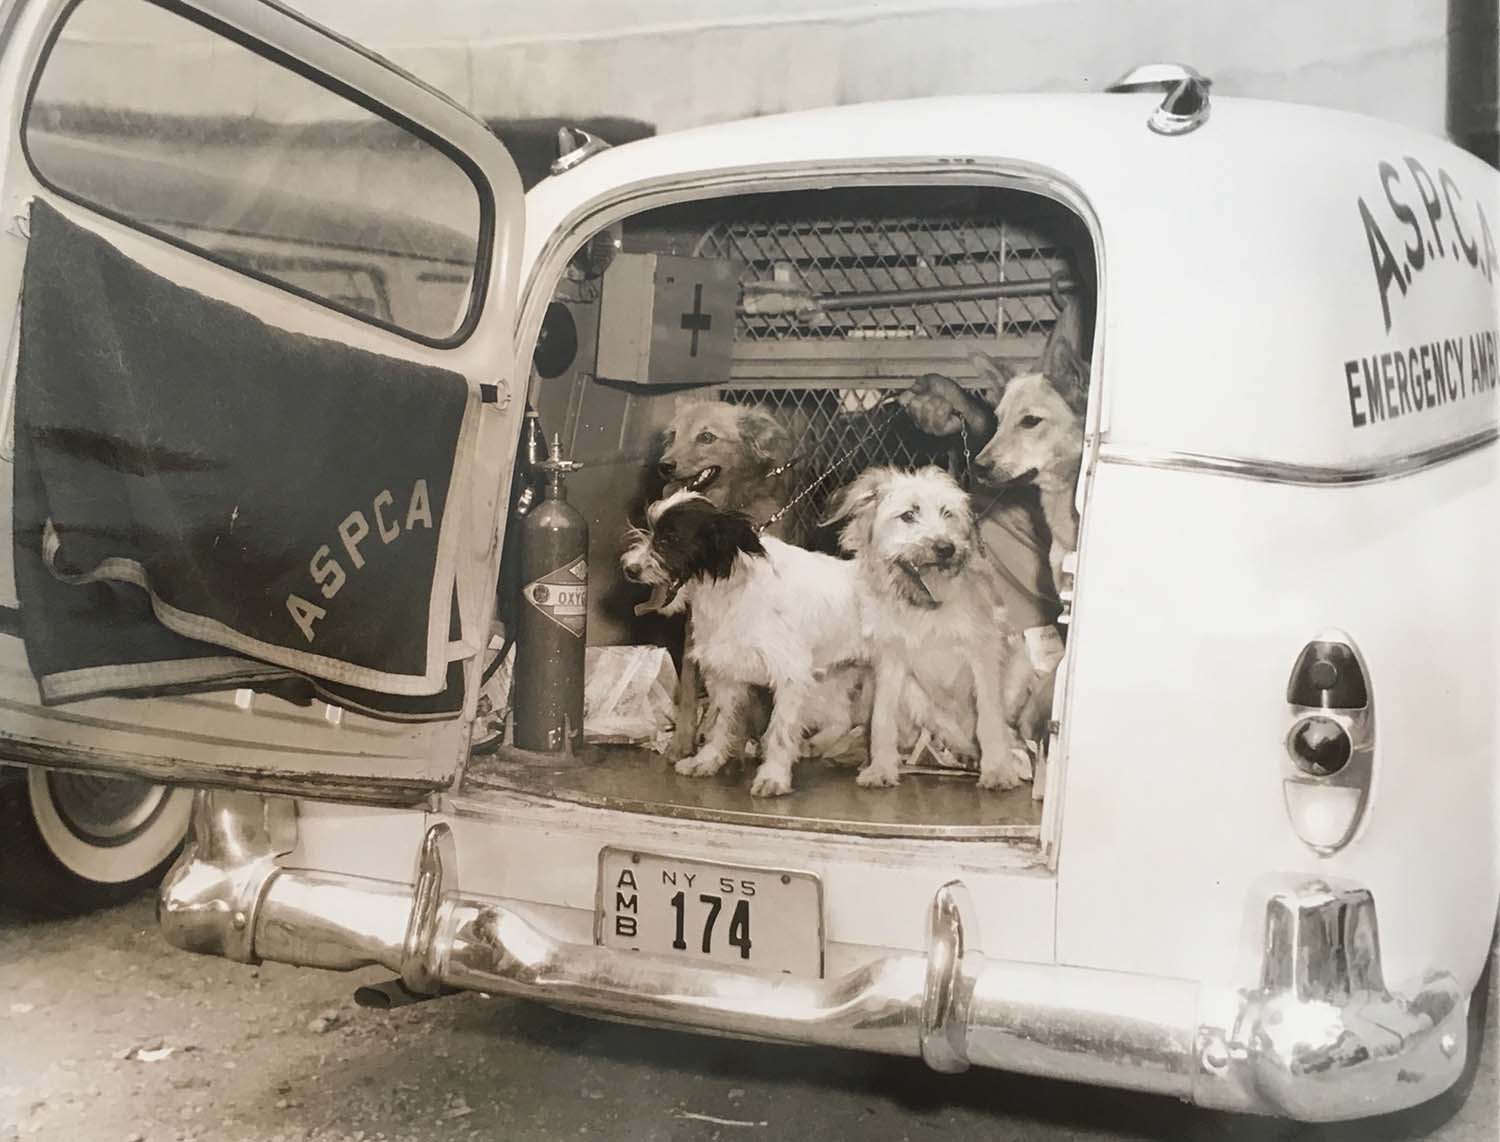 Stray dogs in ASPCA ambulance arrive at Leone's restaurant for lunch to launch Disney's "Lady and the Tramp", 1955